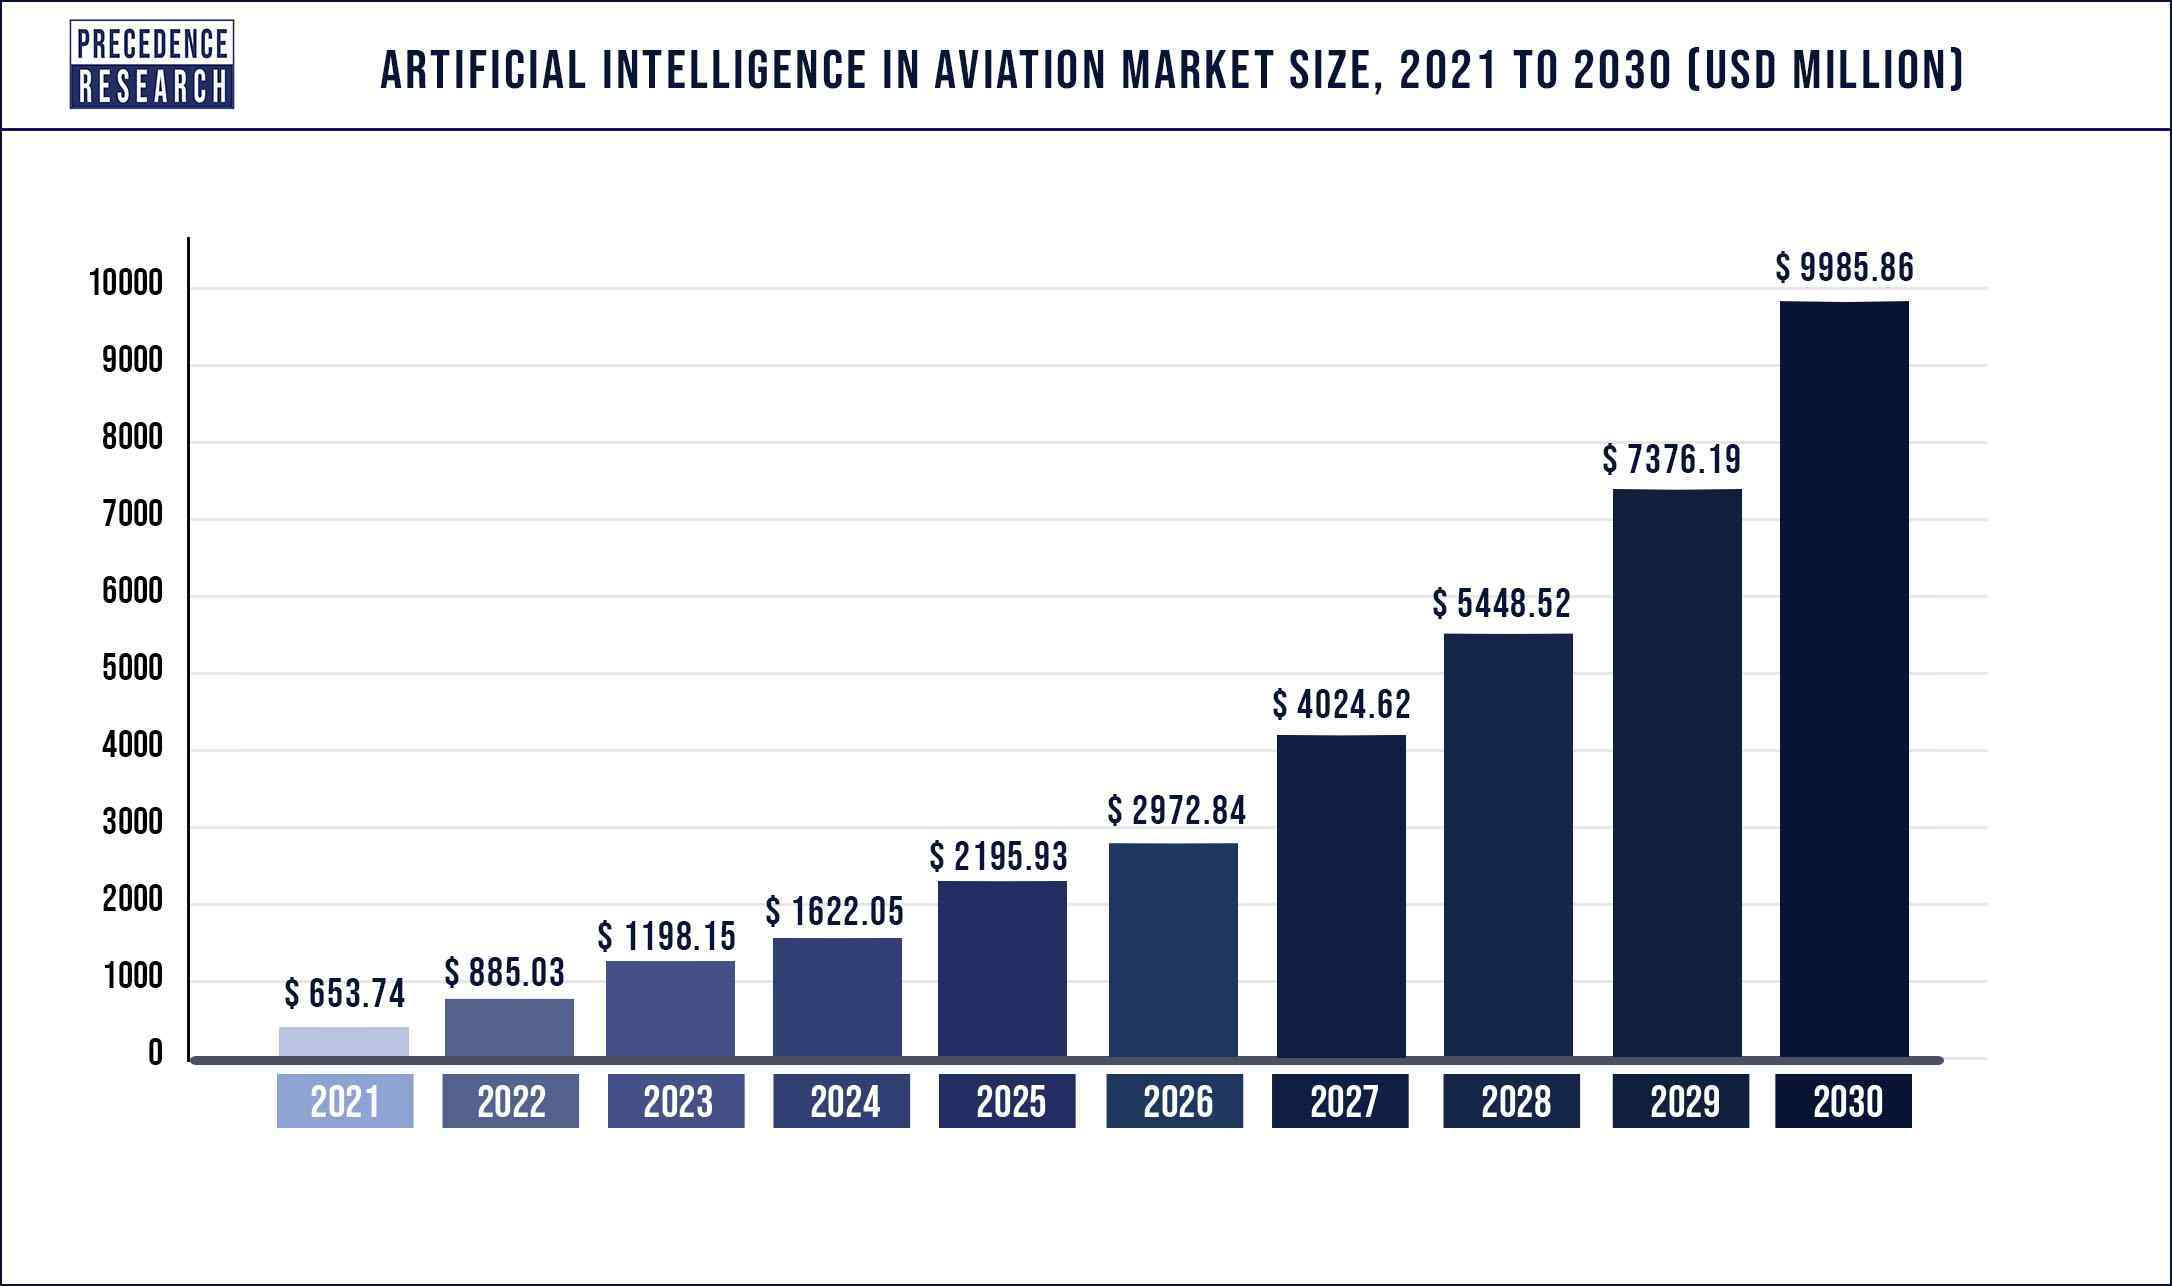 Artificial Intelligence in Aviation Market Size 2021 to 2030